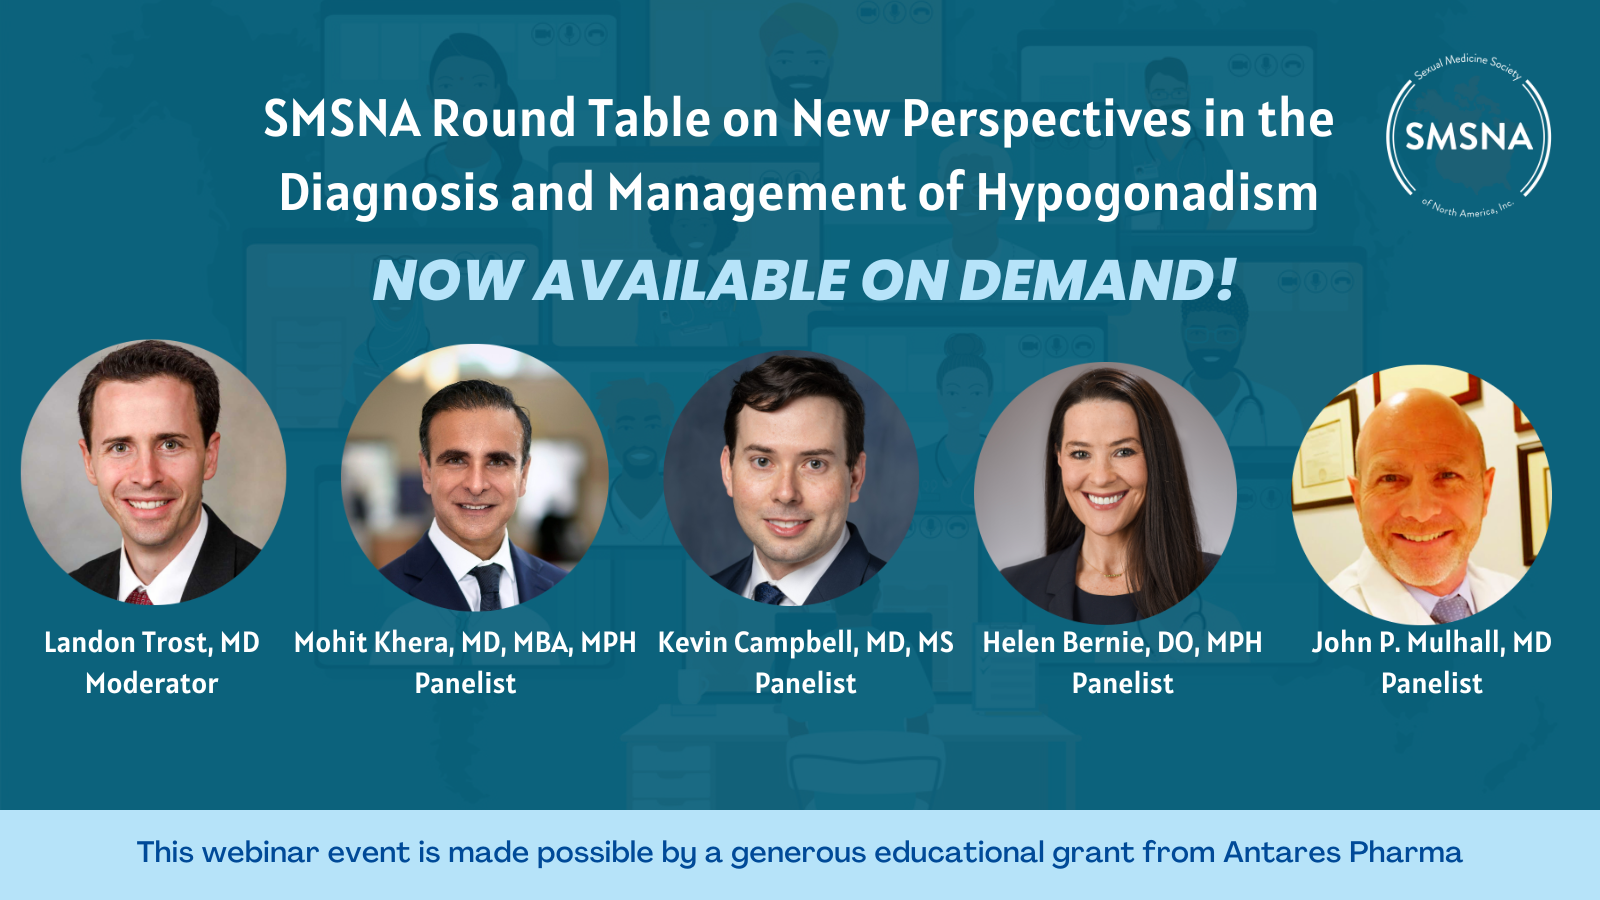 SMSNA Round Table on New Perspectives in the Diagnosis and Management of Hypogonadism: Now Available on Demand!